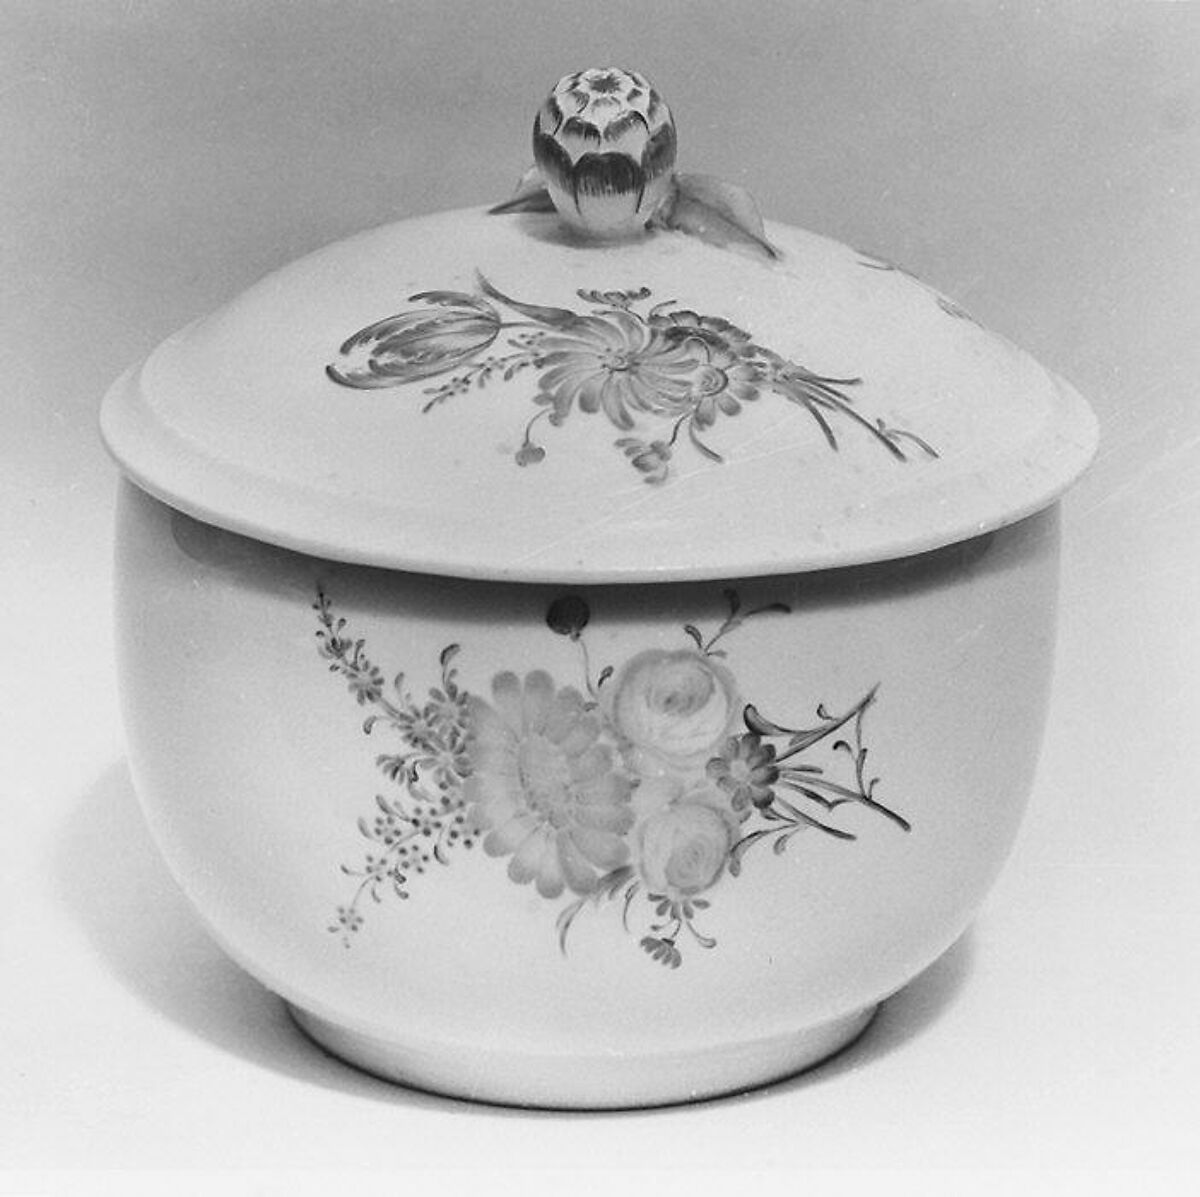 Sugar bowl with cover, Attributed to Baden-Baden Pottery and Porcelain Manufactory (German), Hard-paste porcelain, German, Baden-Baden 